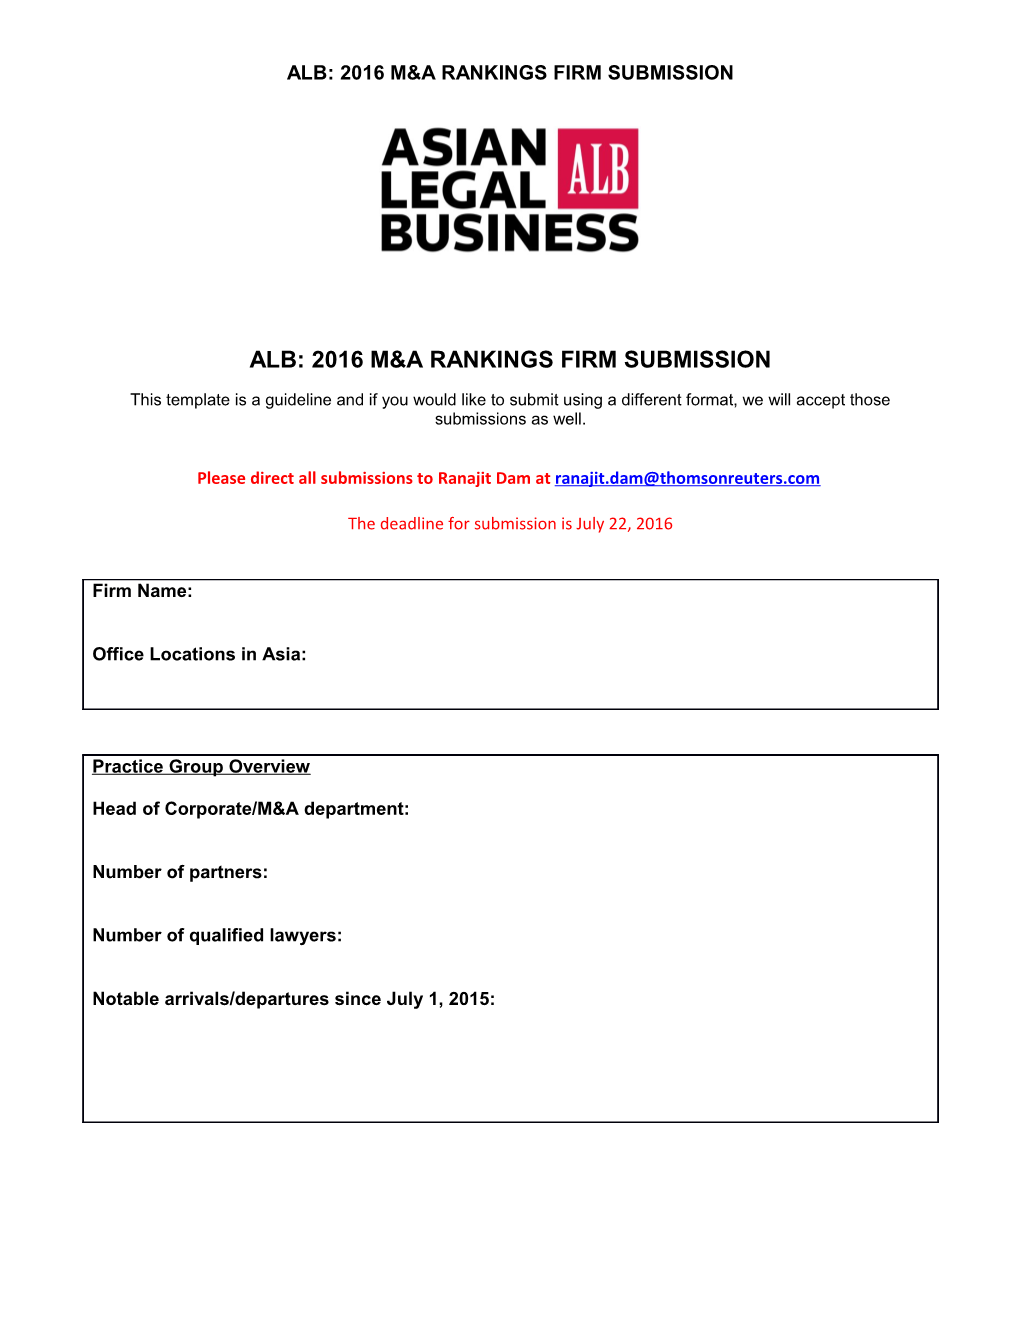 Alb: 2016M&Arankings Firm Submission